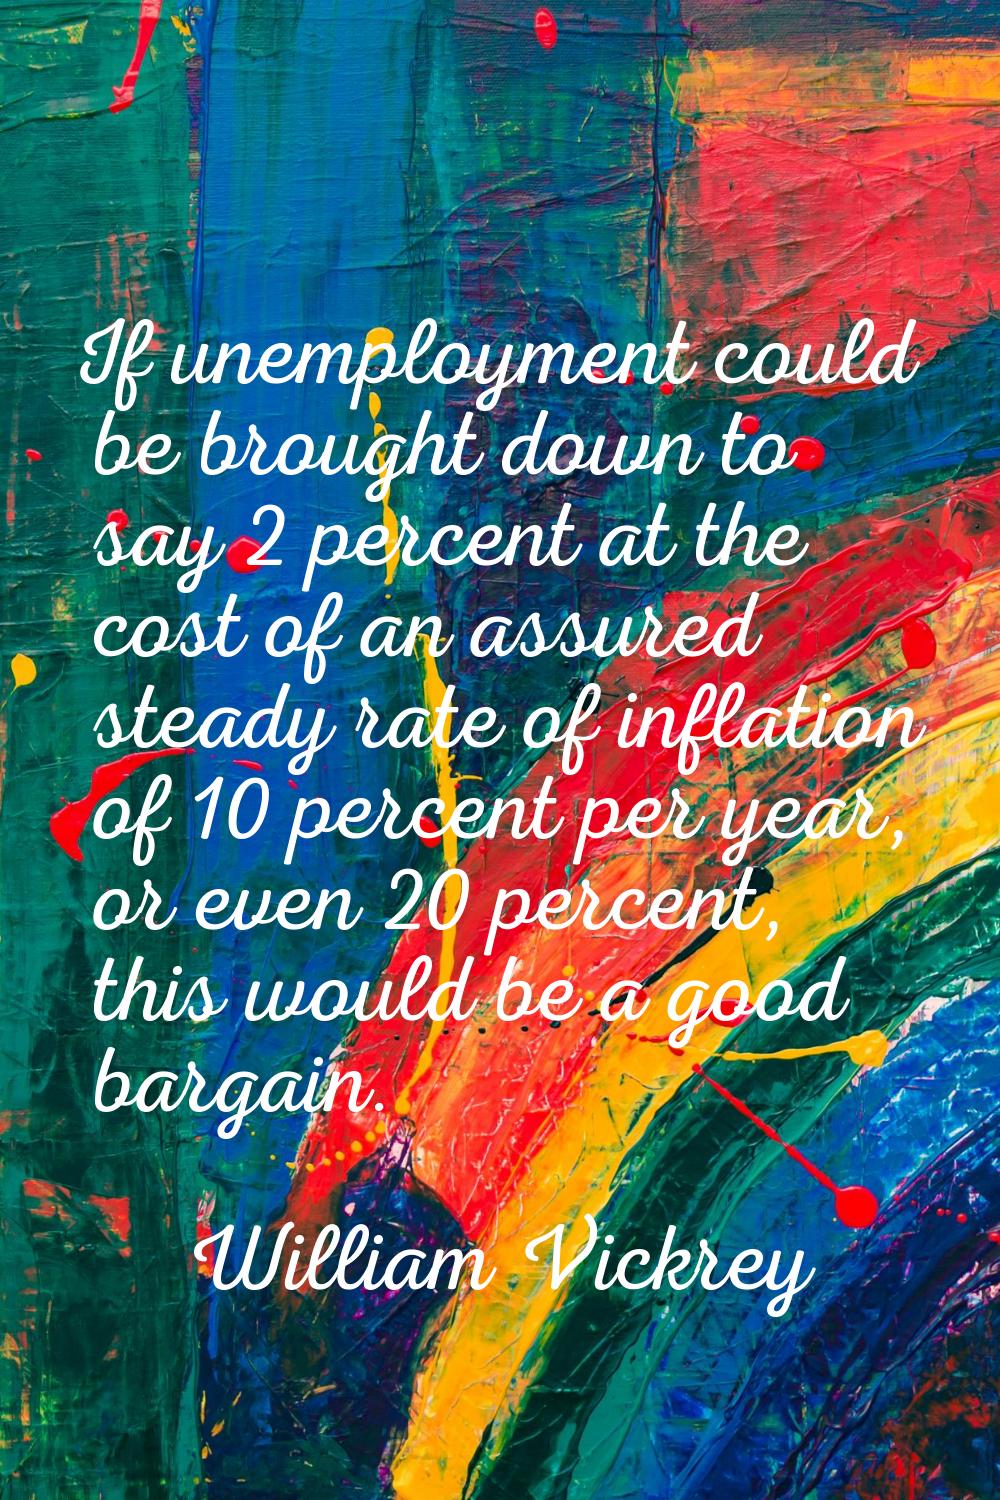 If unemployment could be brought down to say 2 percent at the cost of an assured steady rate of inf